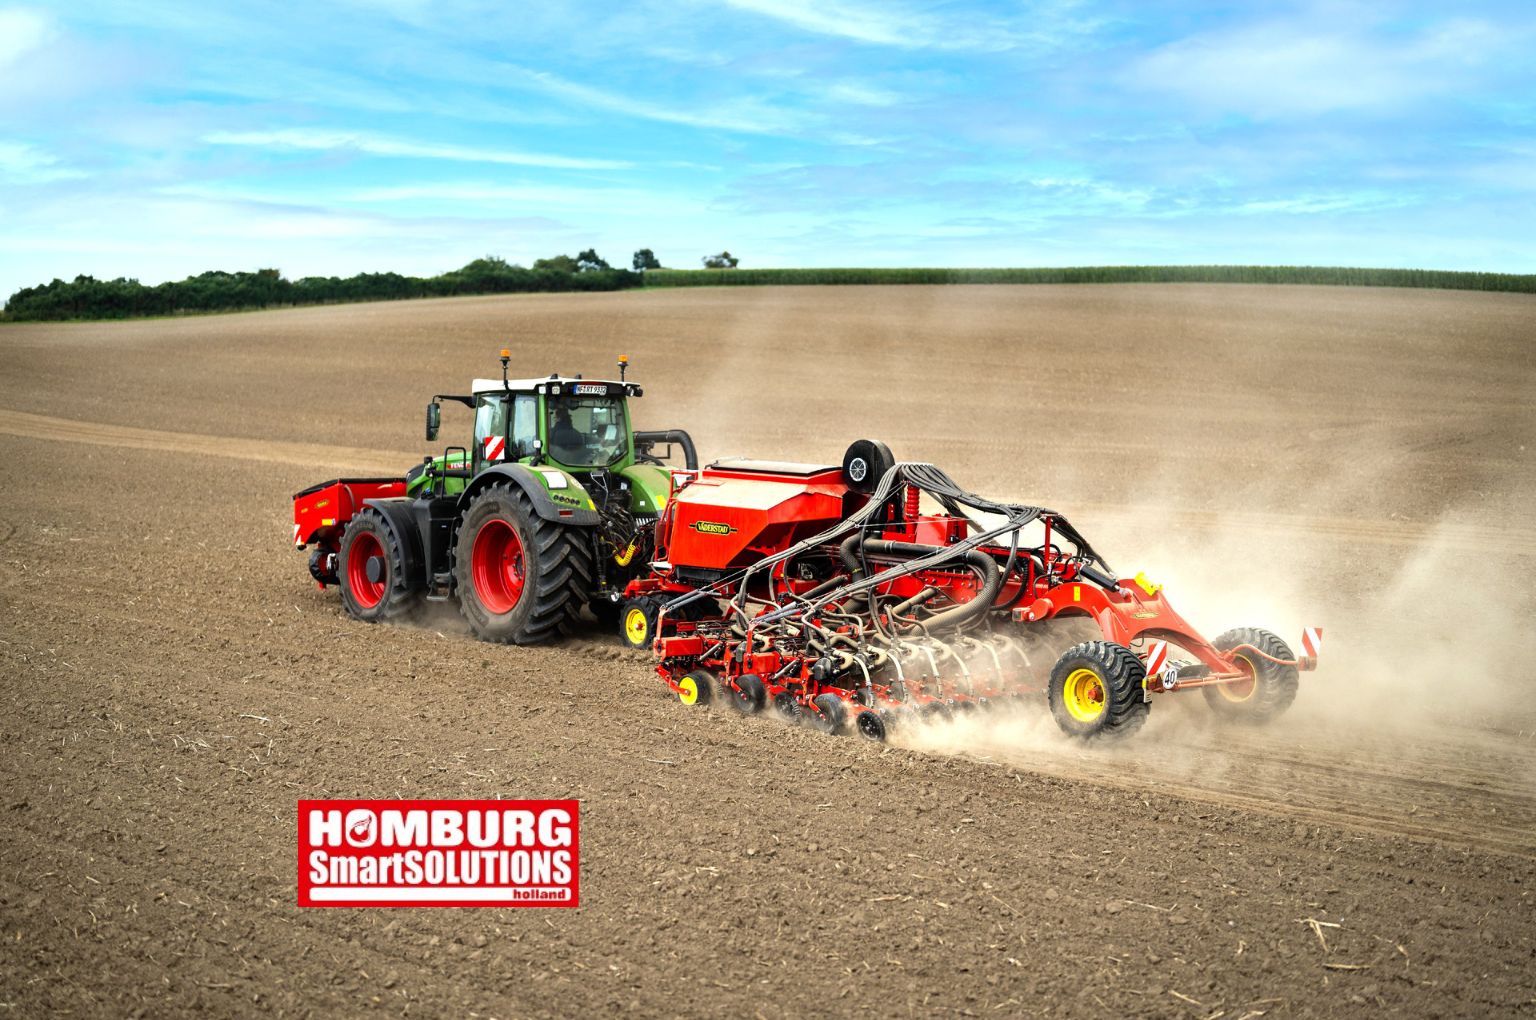 Hombug SmartSOLUTIONS at Agritechnica